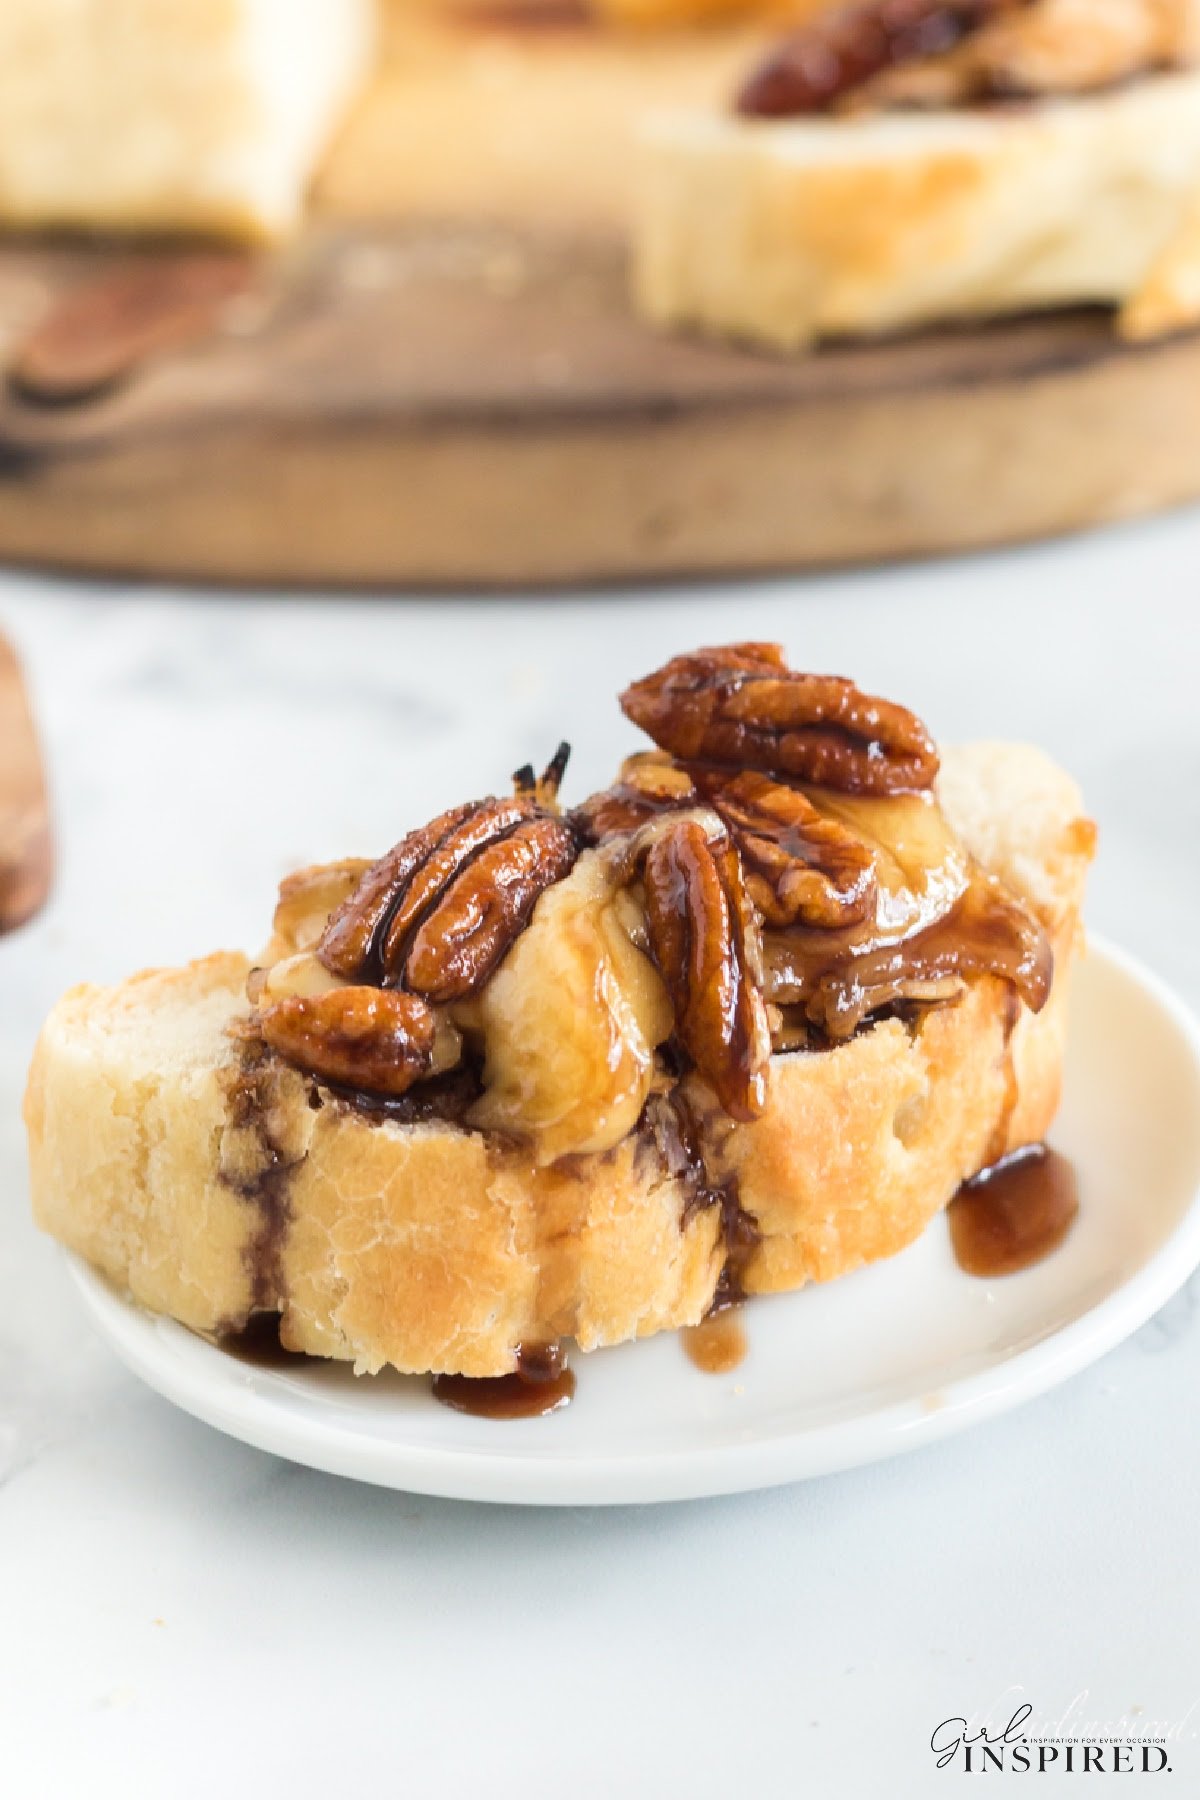 Brown sugar baked brie with brown sugar pecans on top of a small piece of bread.